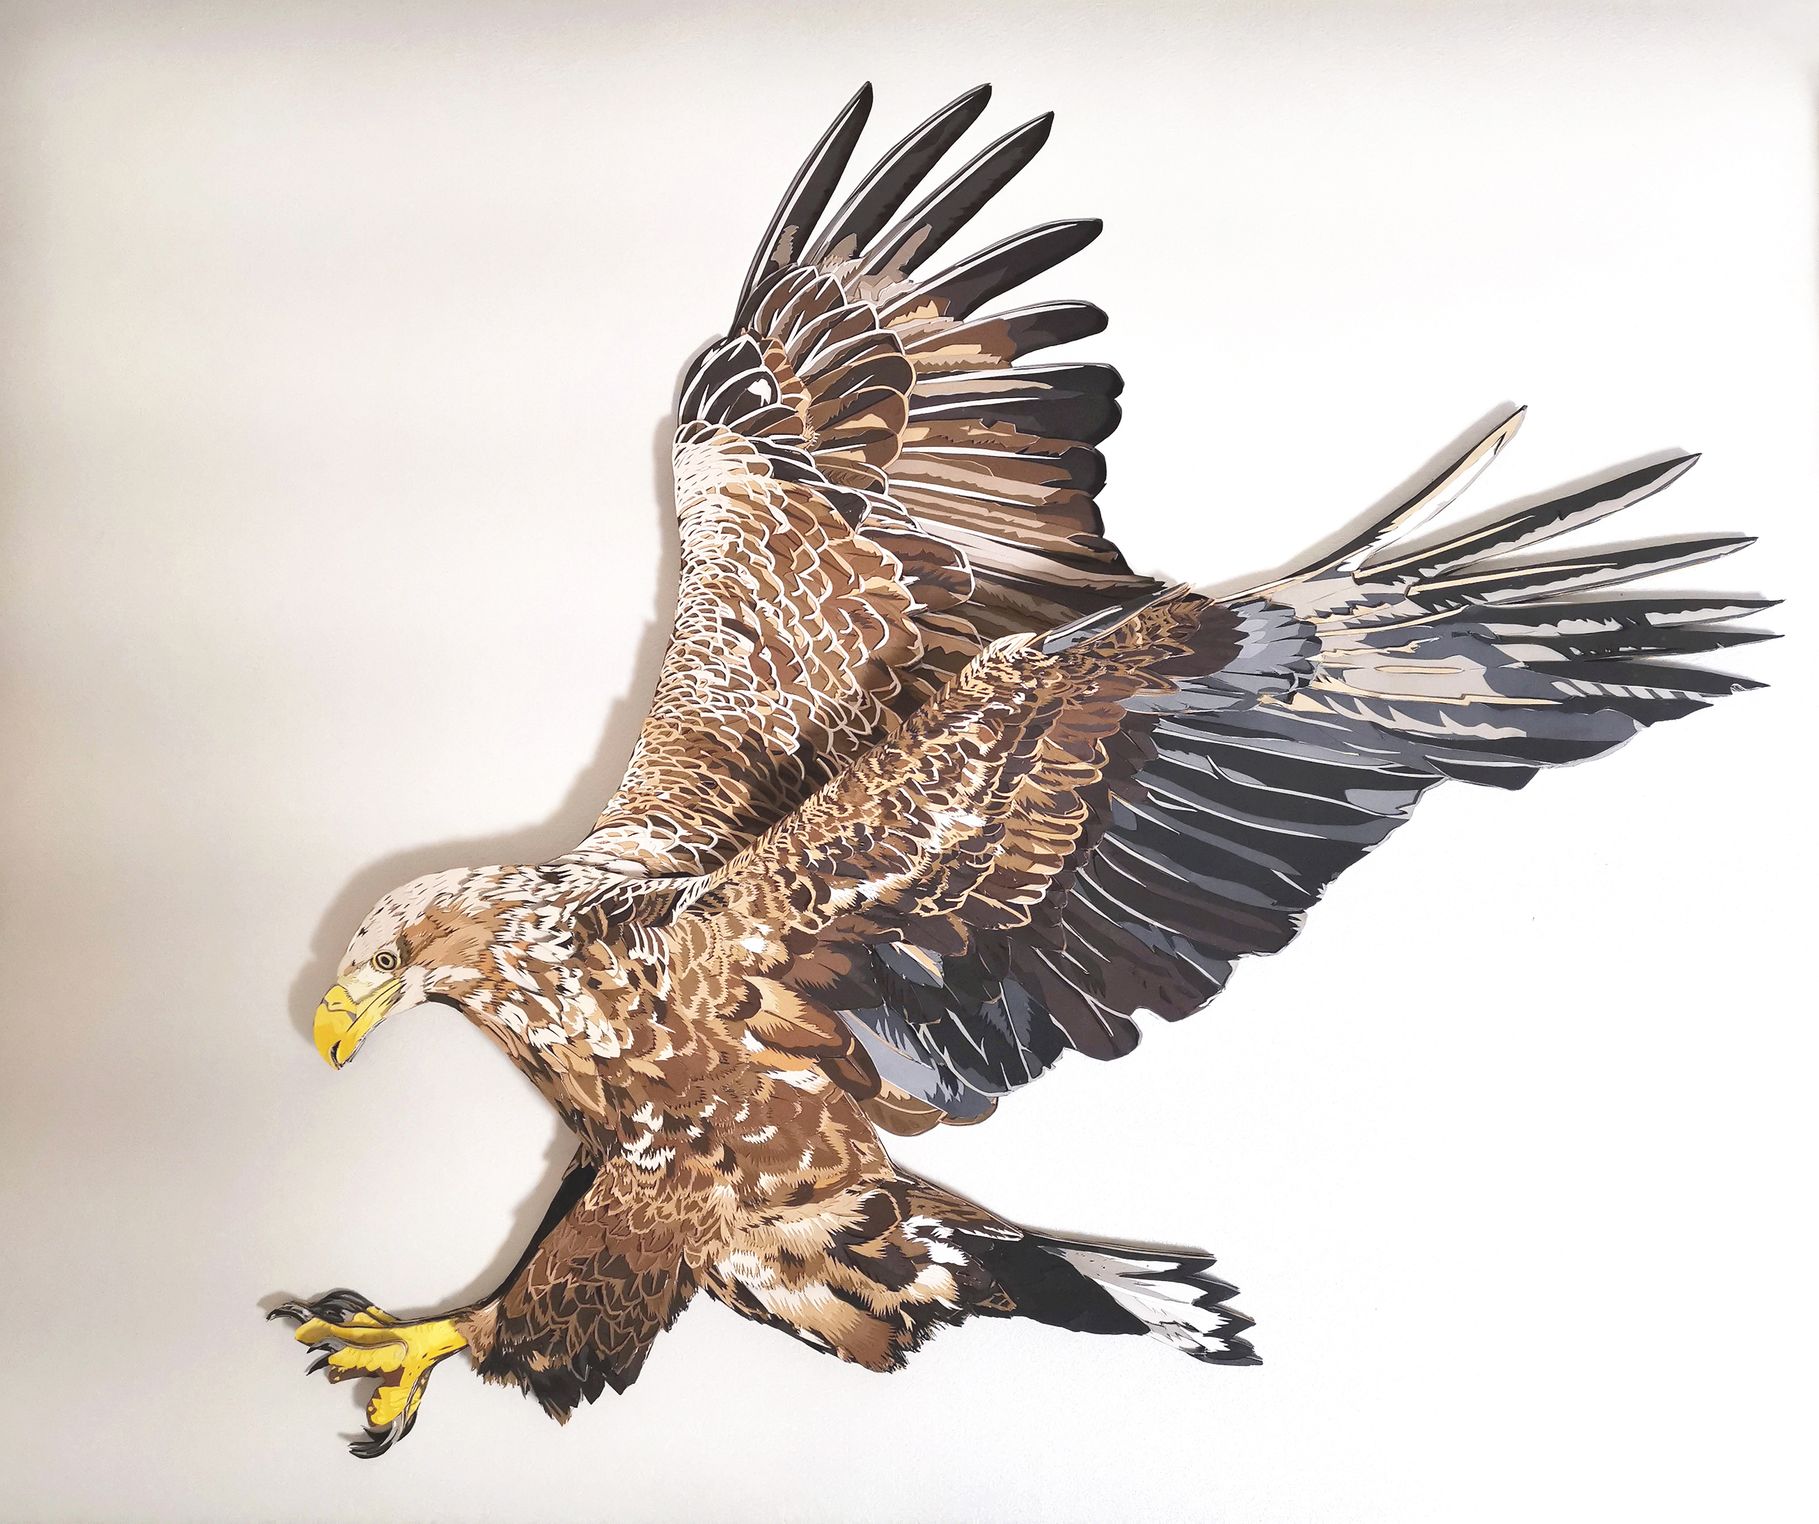 #MM.01 Title: "White-Tailed Eagle"